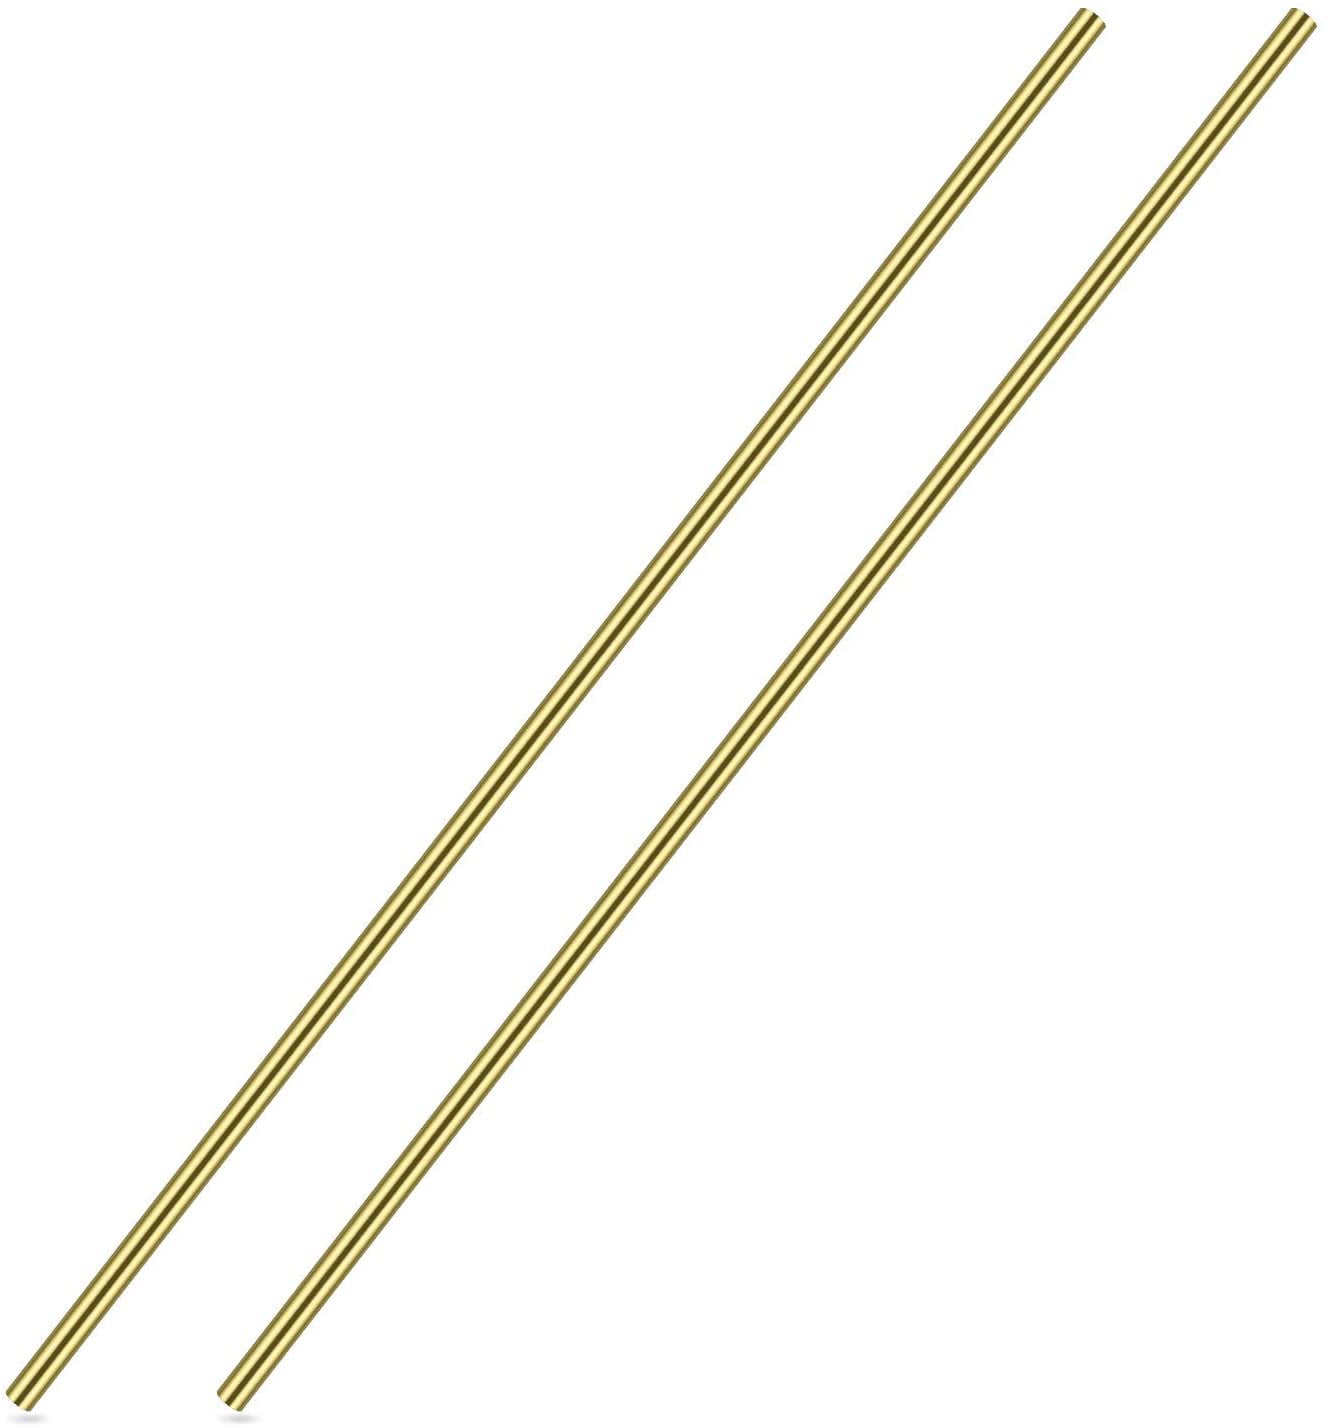 Brass Solid Round Rod Lathe Bar Stock 1 4 Inch In Diameter 14 Length 2 Pcs 